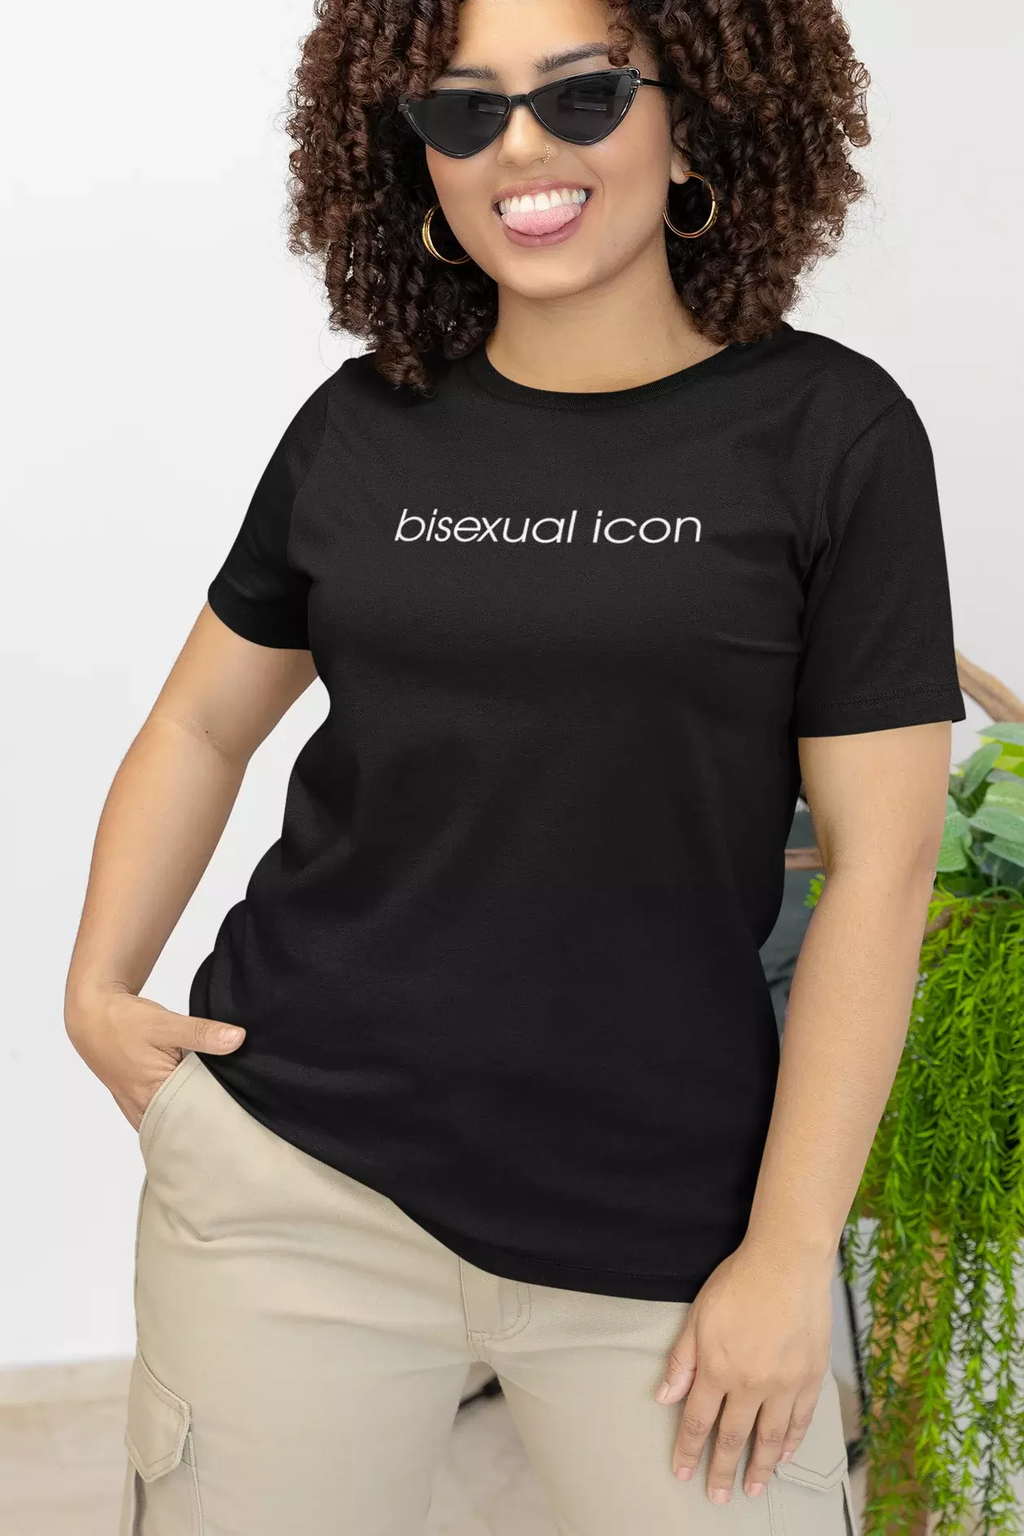 bi icon top?width=1024&height=1024&fit=cover&auto=webp